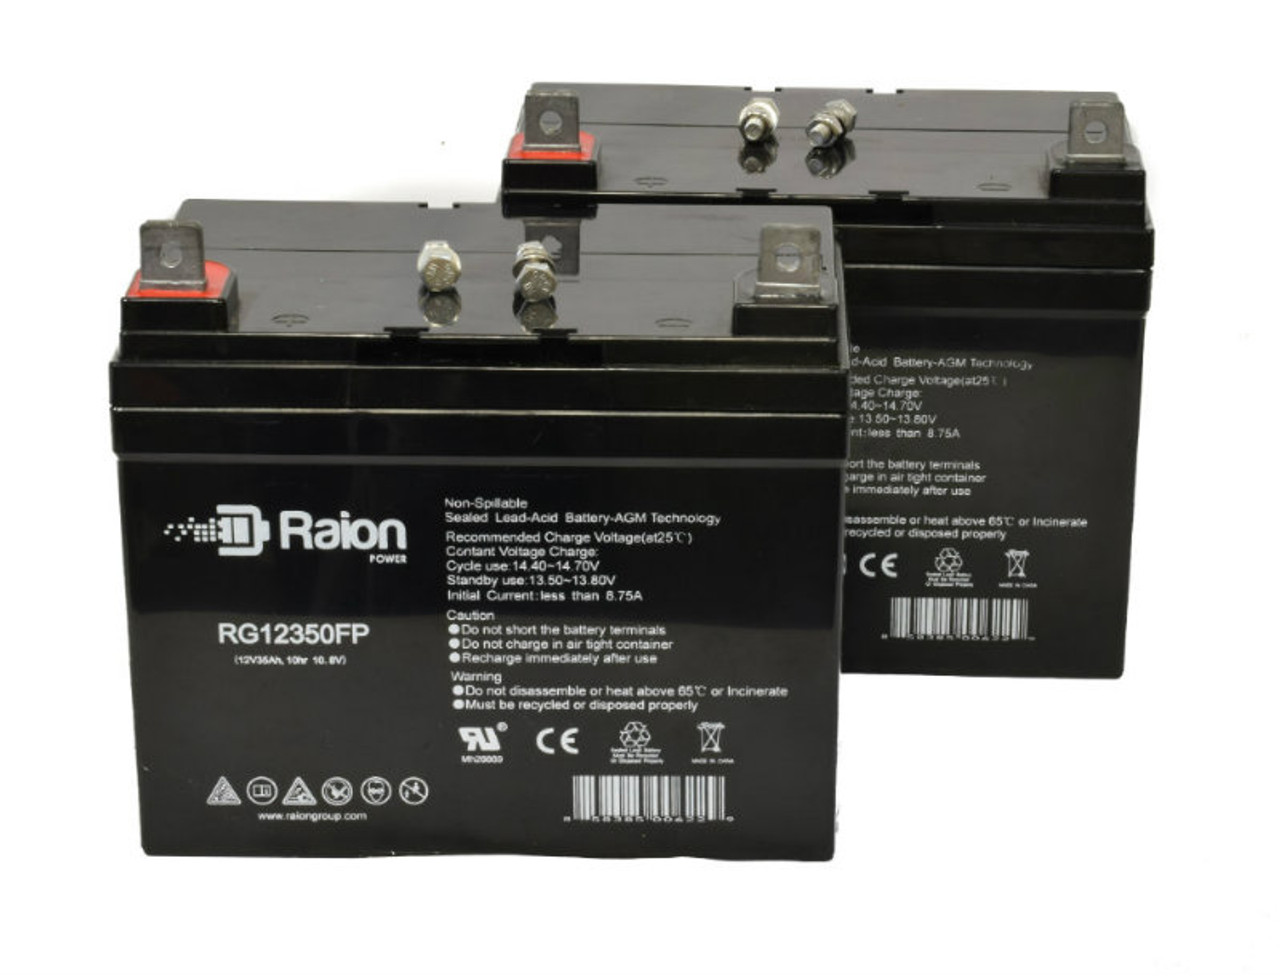 Raion Power Replacement 12V 35Ah Lawn Mower Battery for Gilson GT14 - 2 Pack